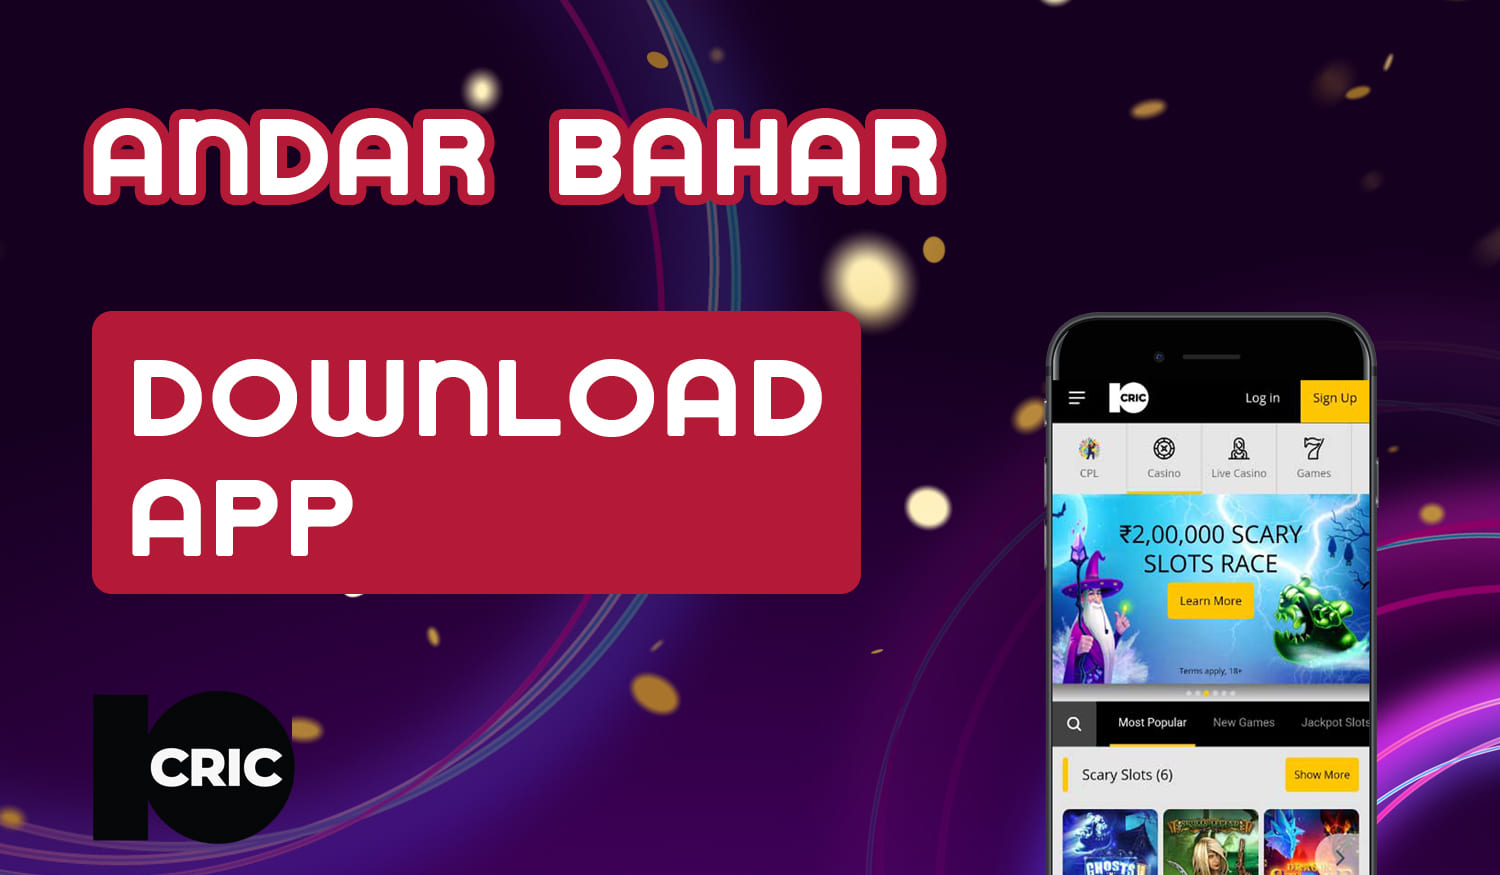 How to download and install 10cric app to play Andar Bahar